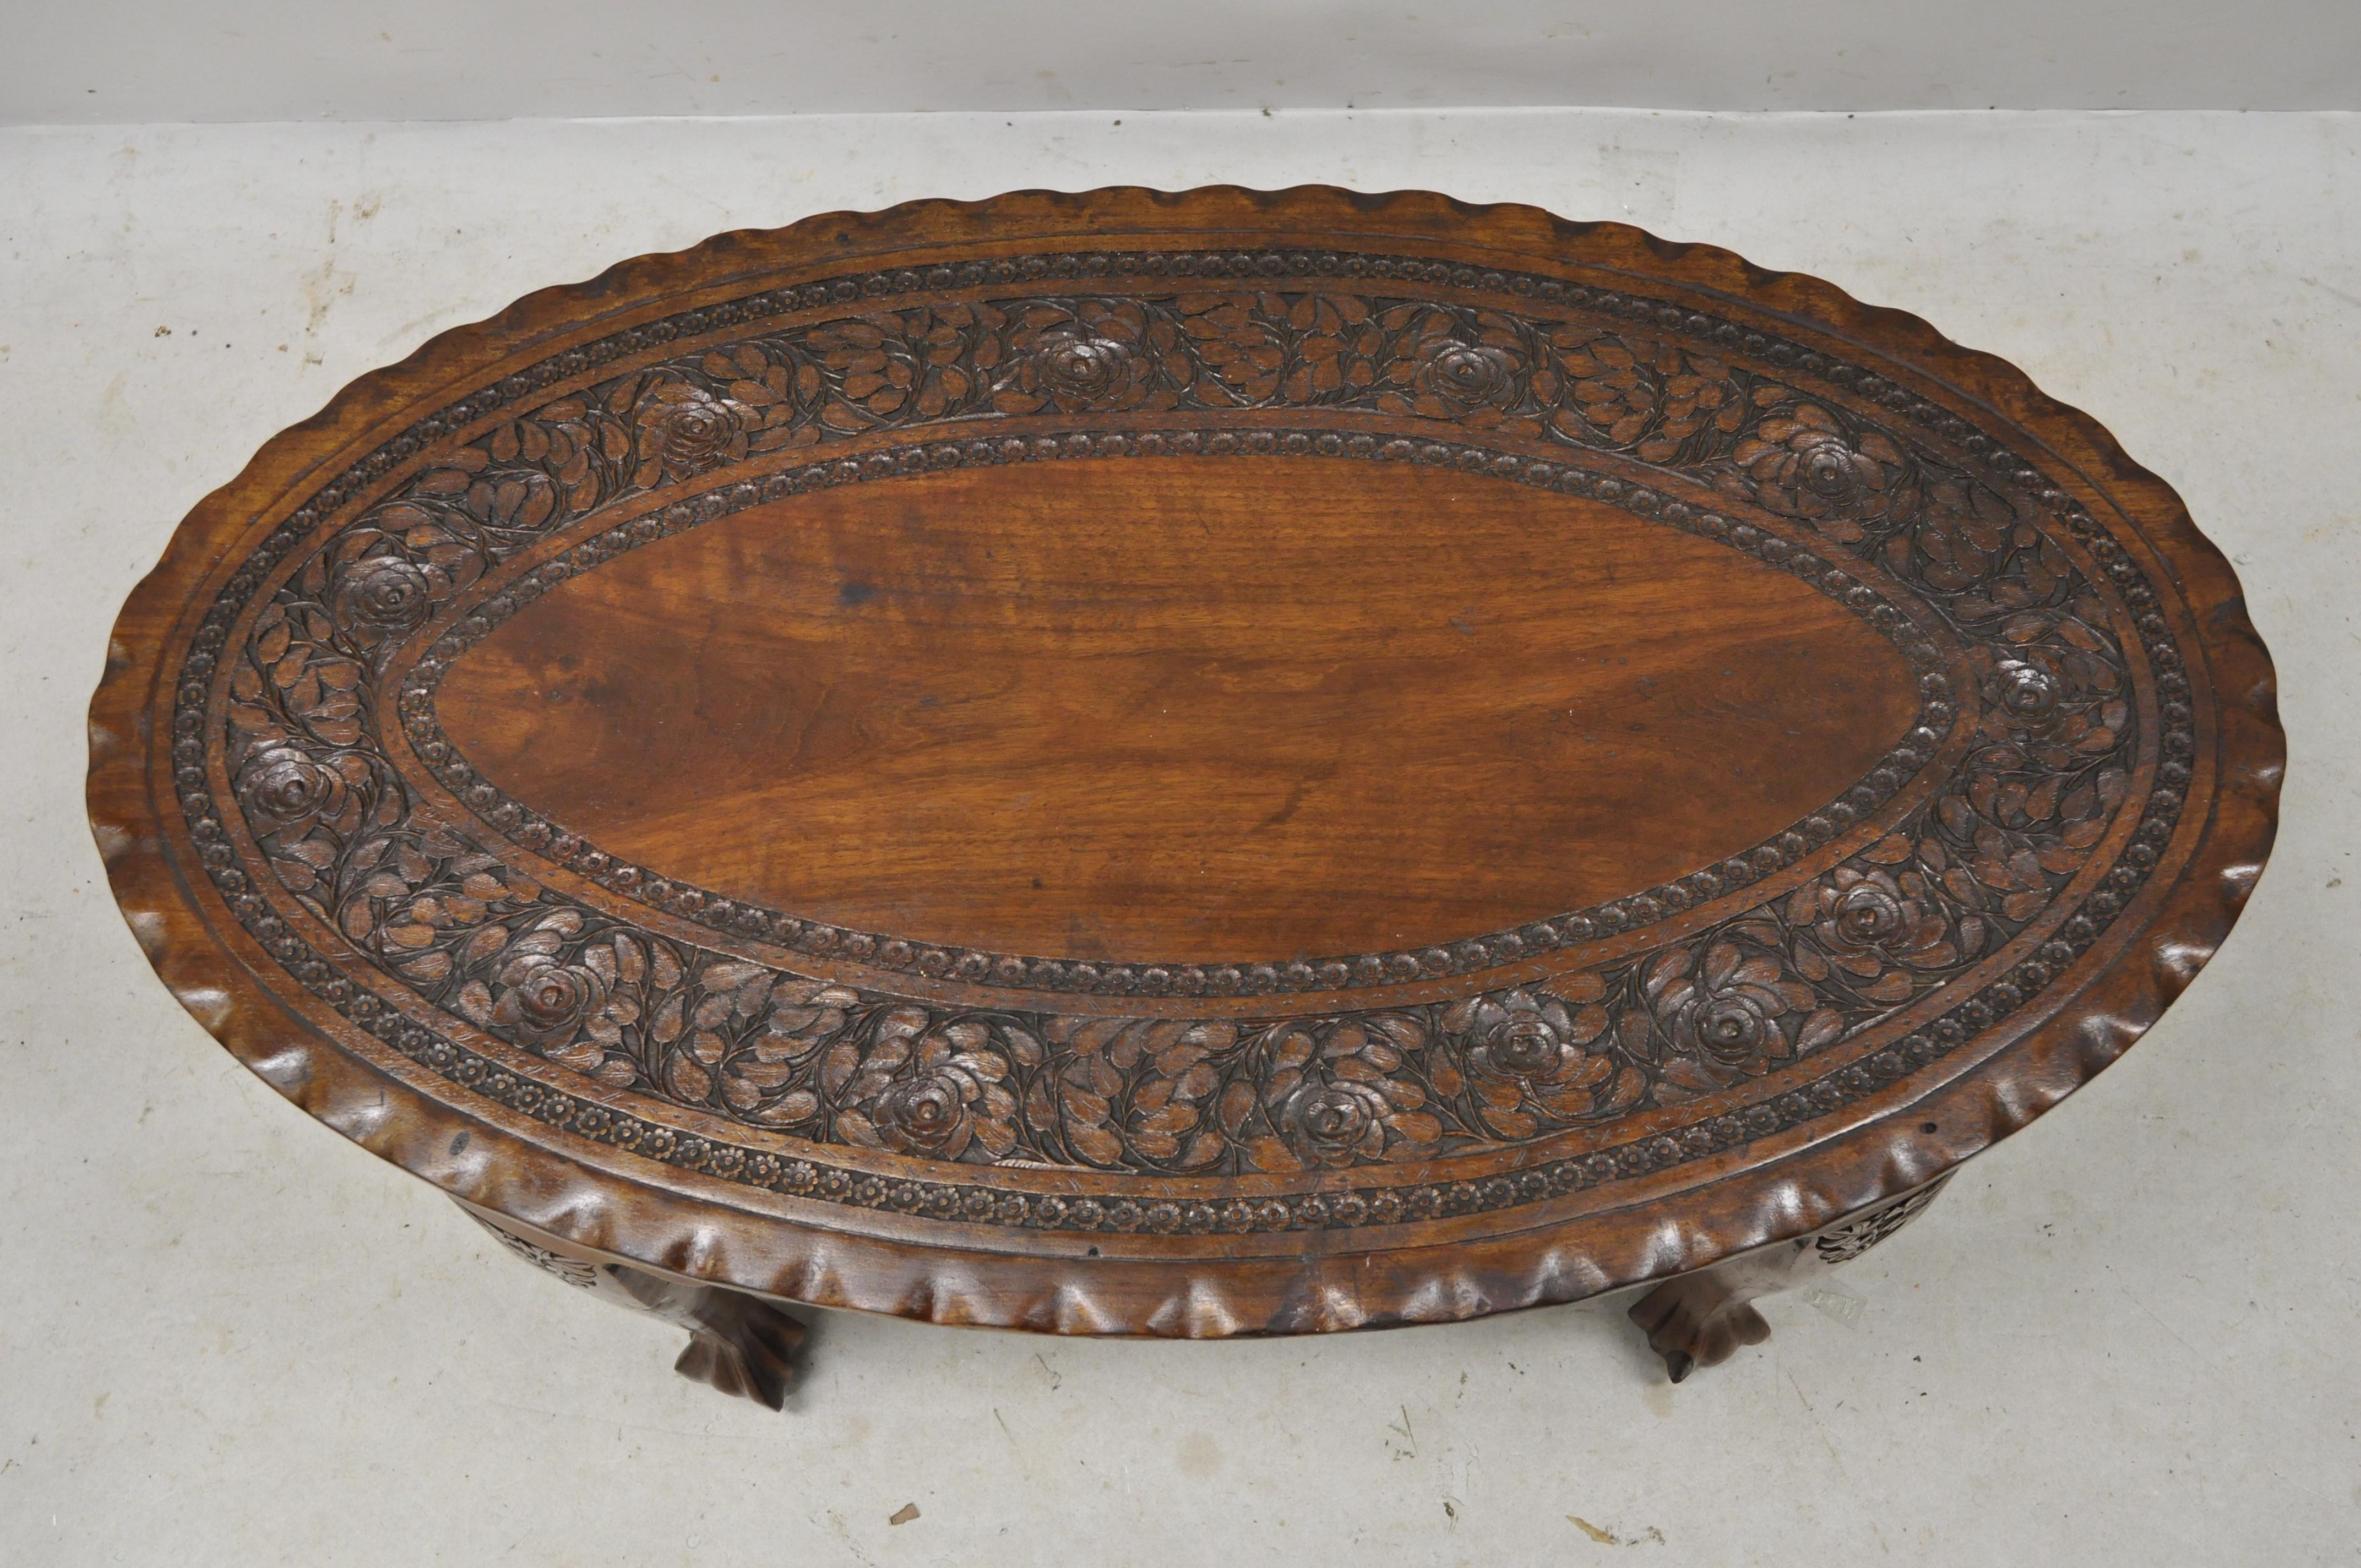 Antique Anglo Indian Georgian small paw feet oval mahogany coffee table (B). Item features ornately carved oval top, solid wood construction, nicely carved details, carved paw feet, great style and form, circa early 1900s. Measurements: 17